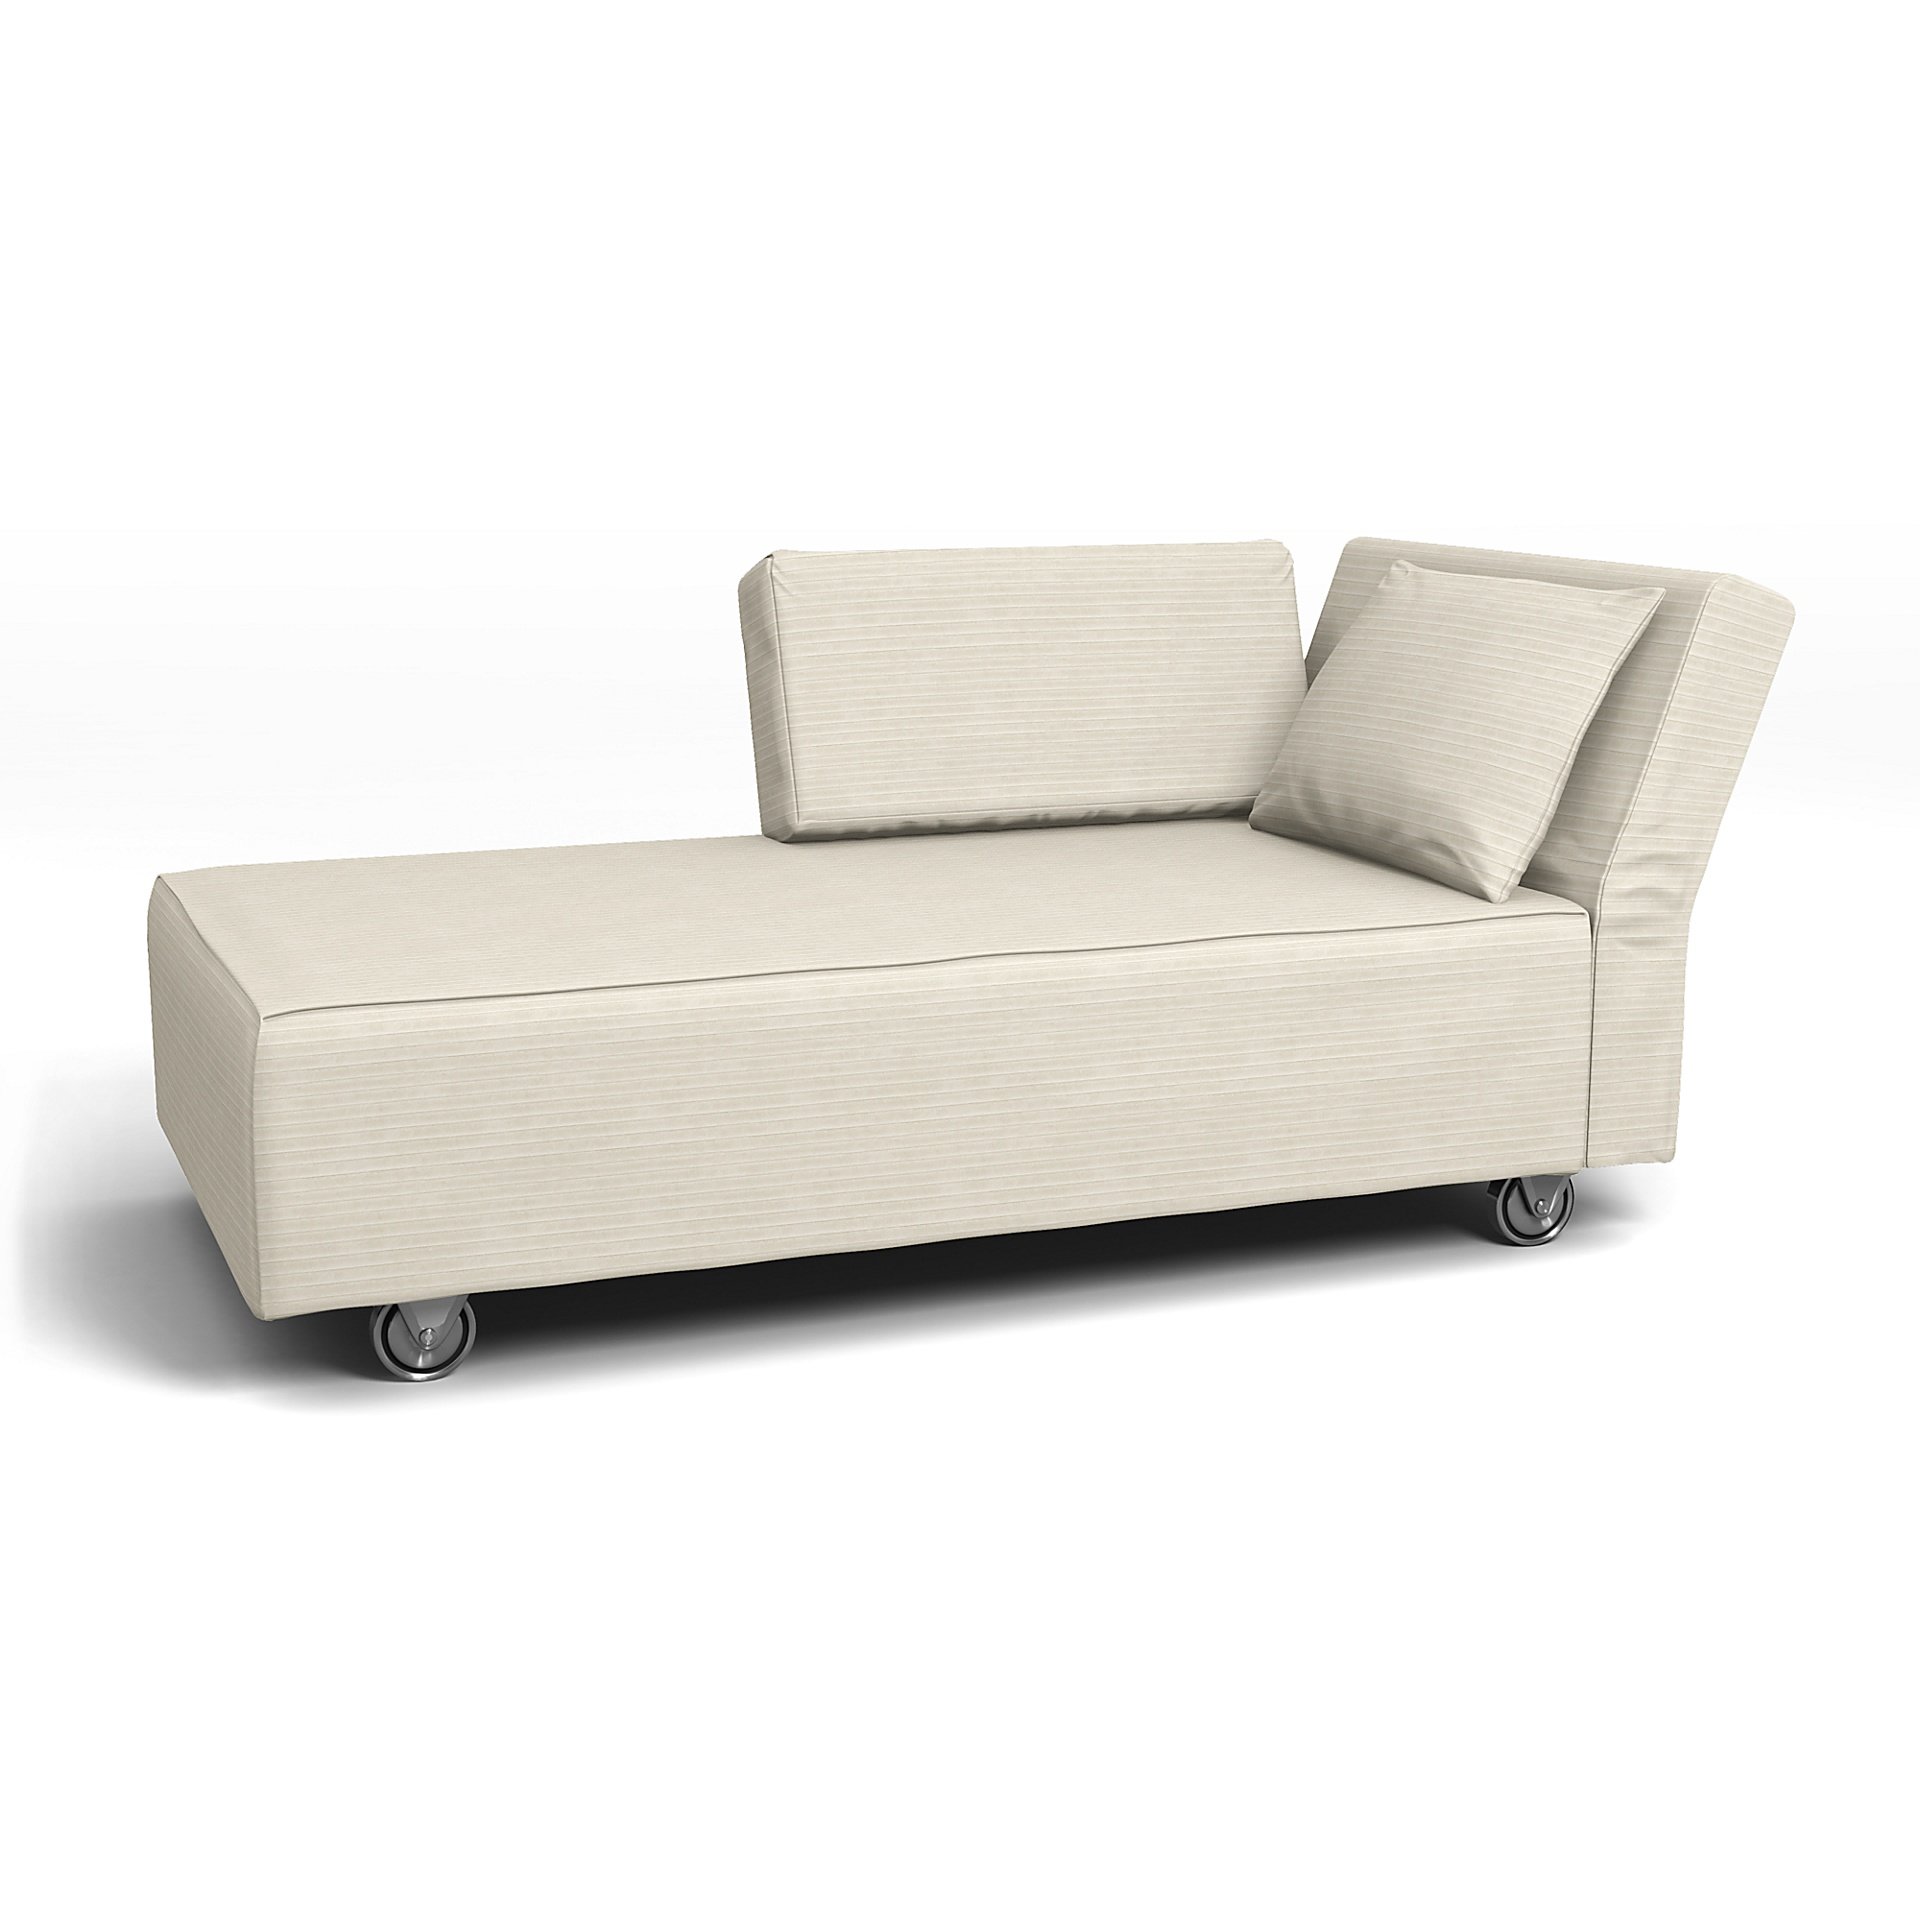 IKEA - Falsterbo Chaise with Right Armrest Cover, Tofu, Corduroy - Bemz